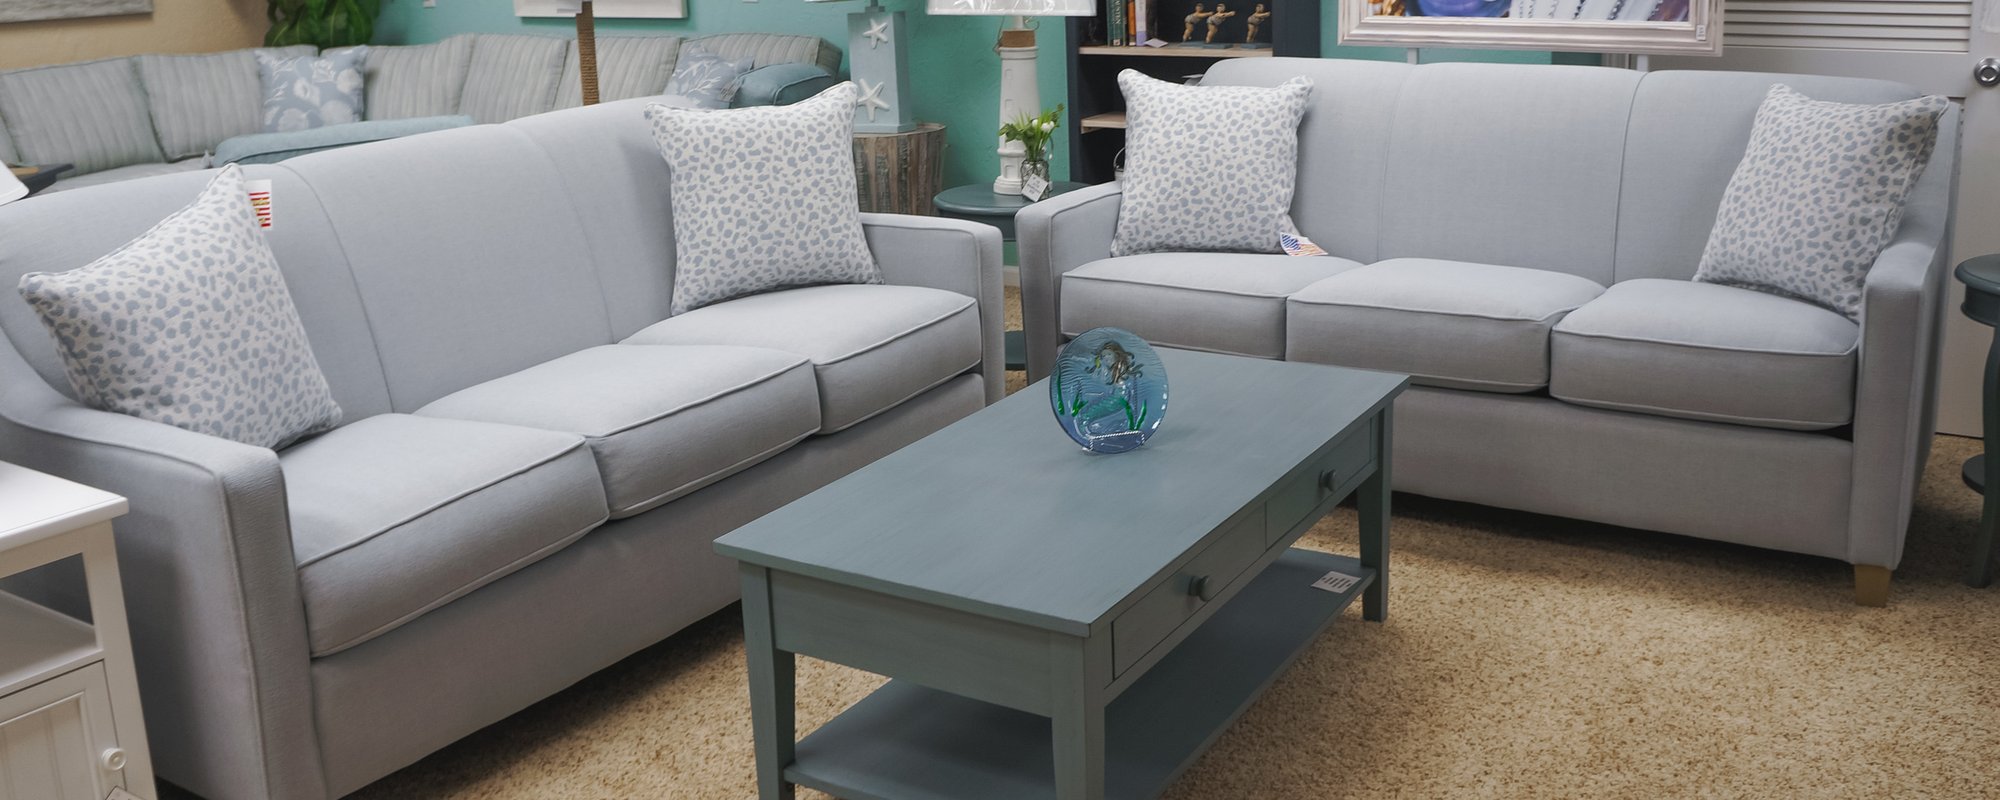 Grey Couches from Kitty Hawk Carpets & Furniture in Kitty Hawk, North Carolina